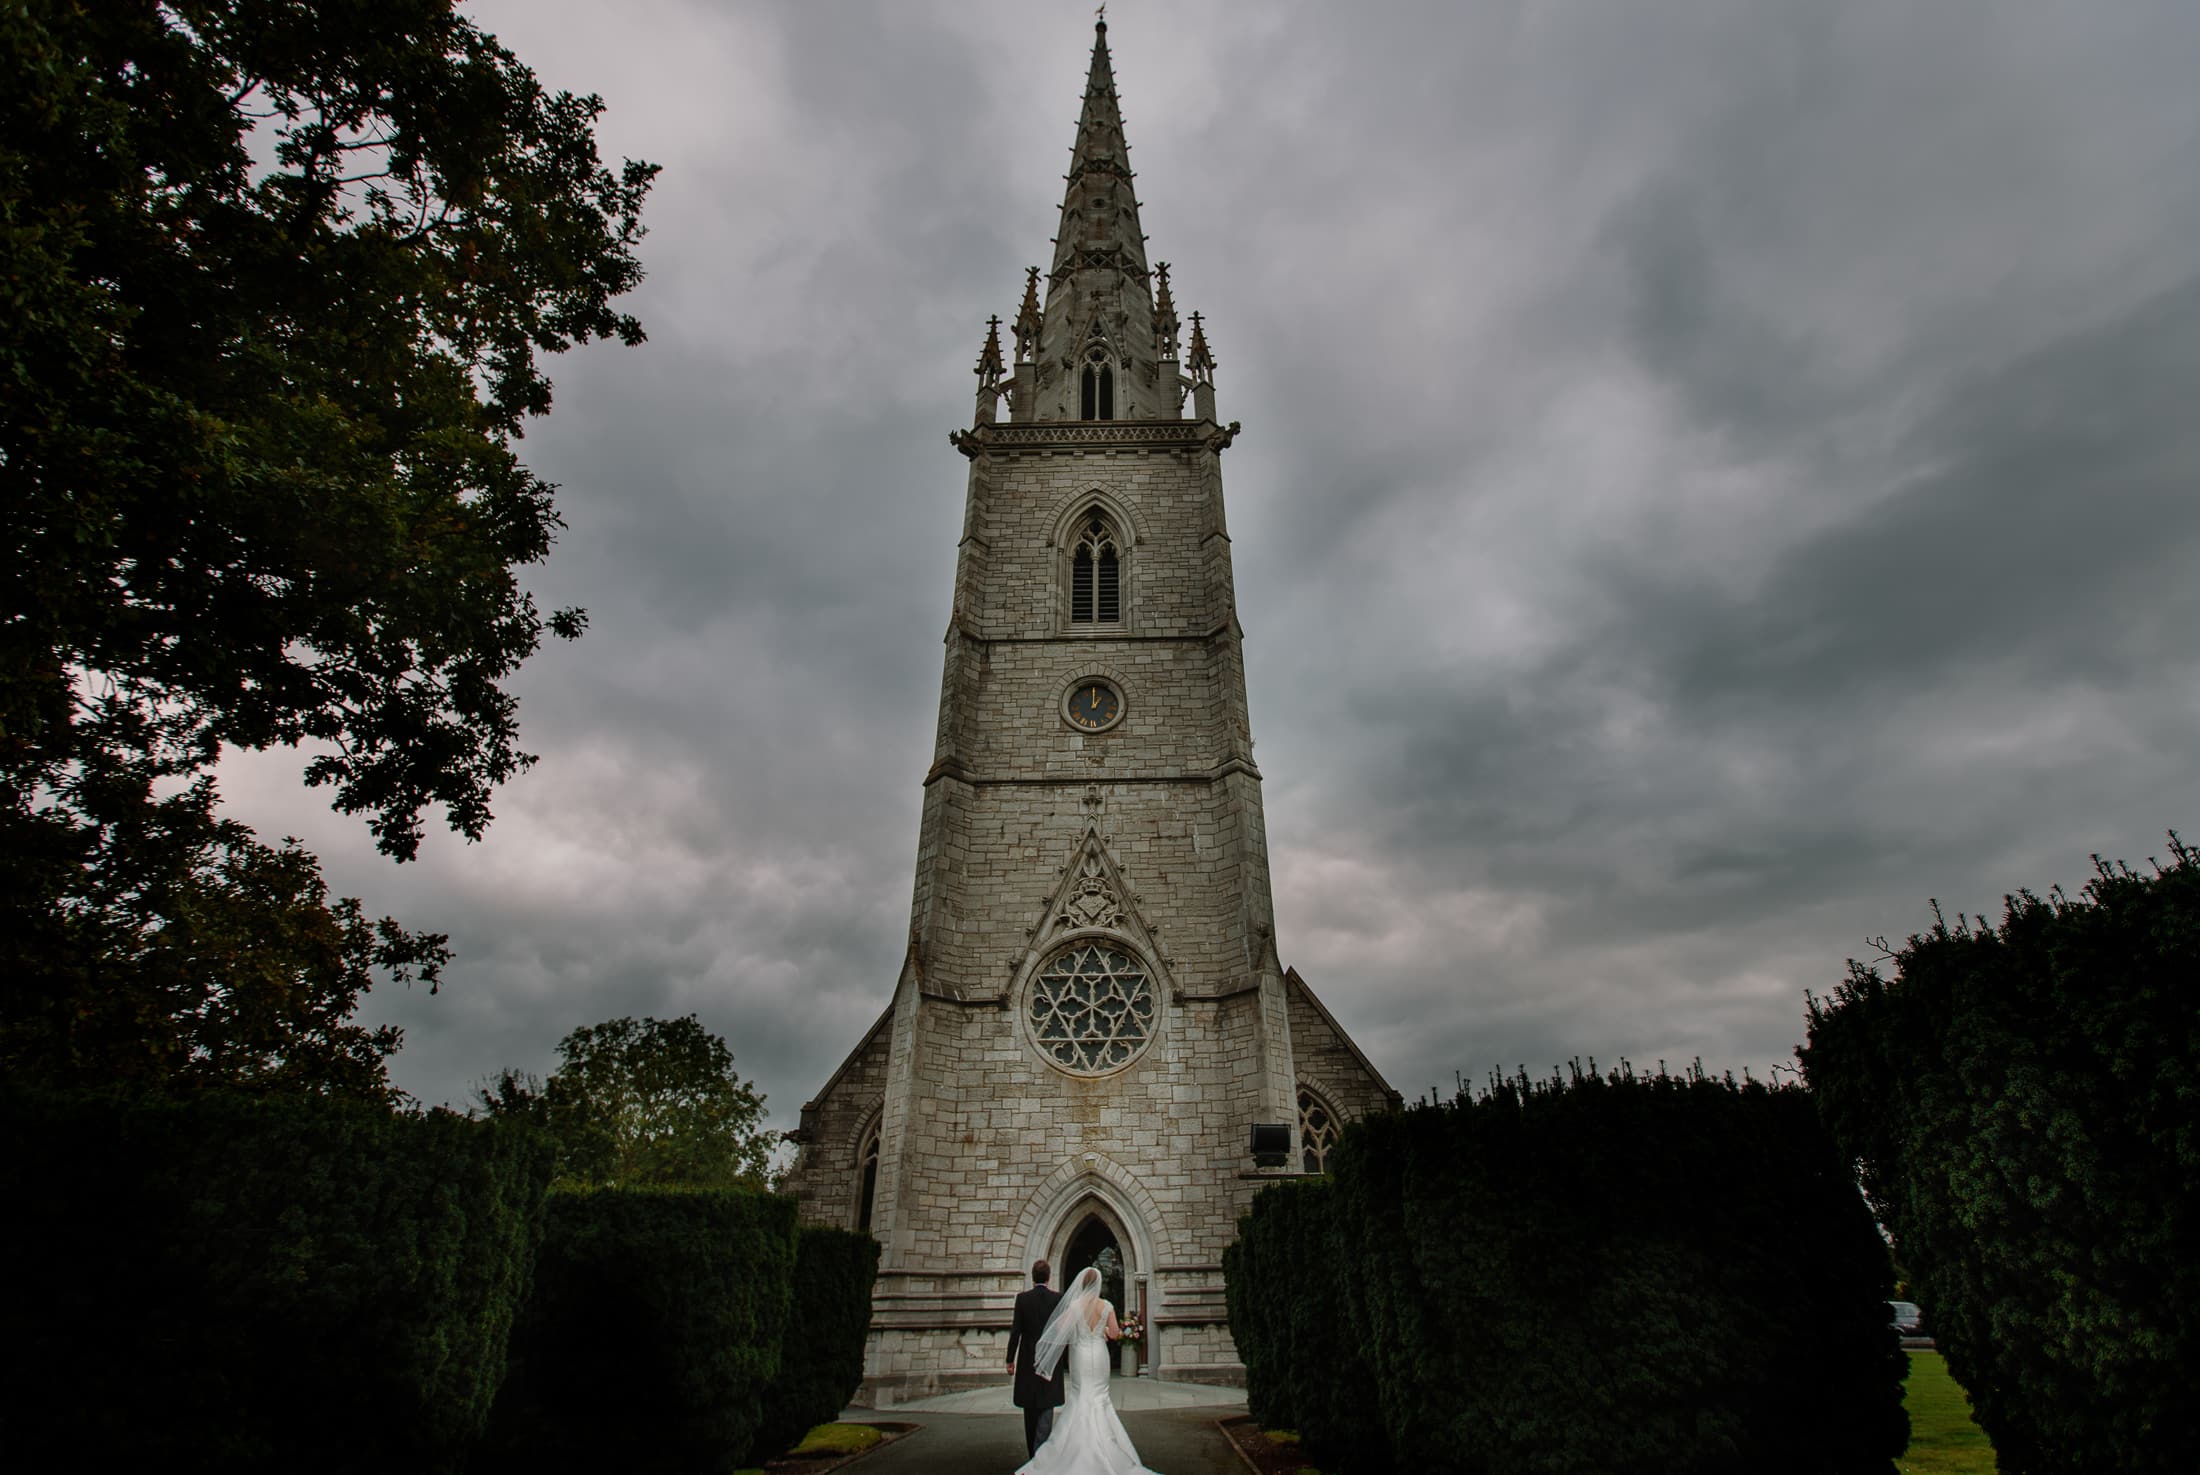 A bride and groom standing in front of a church.